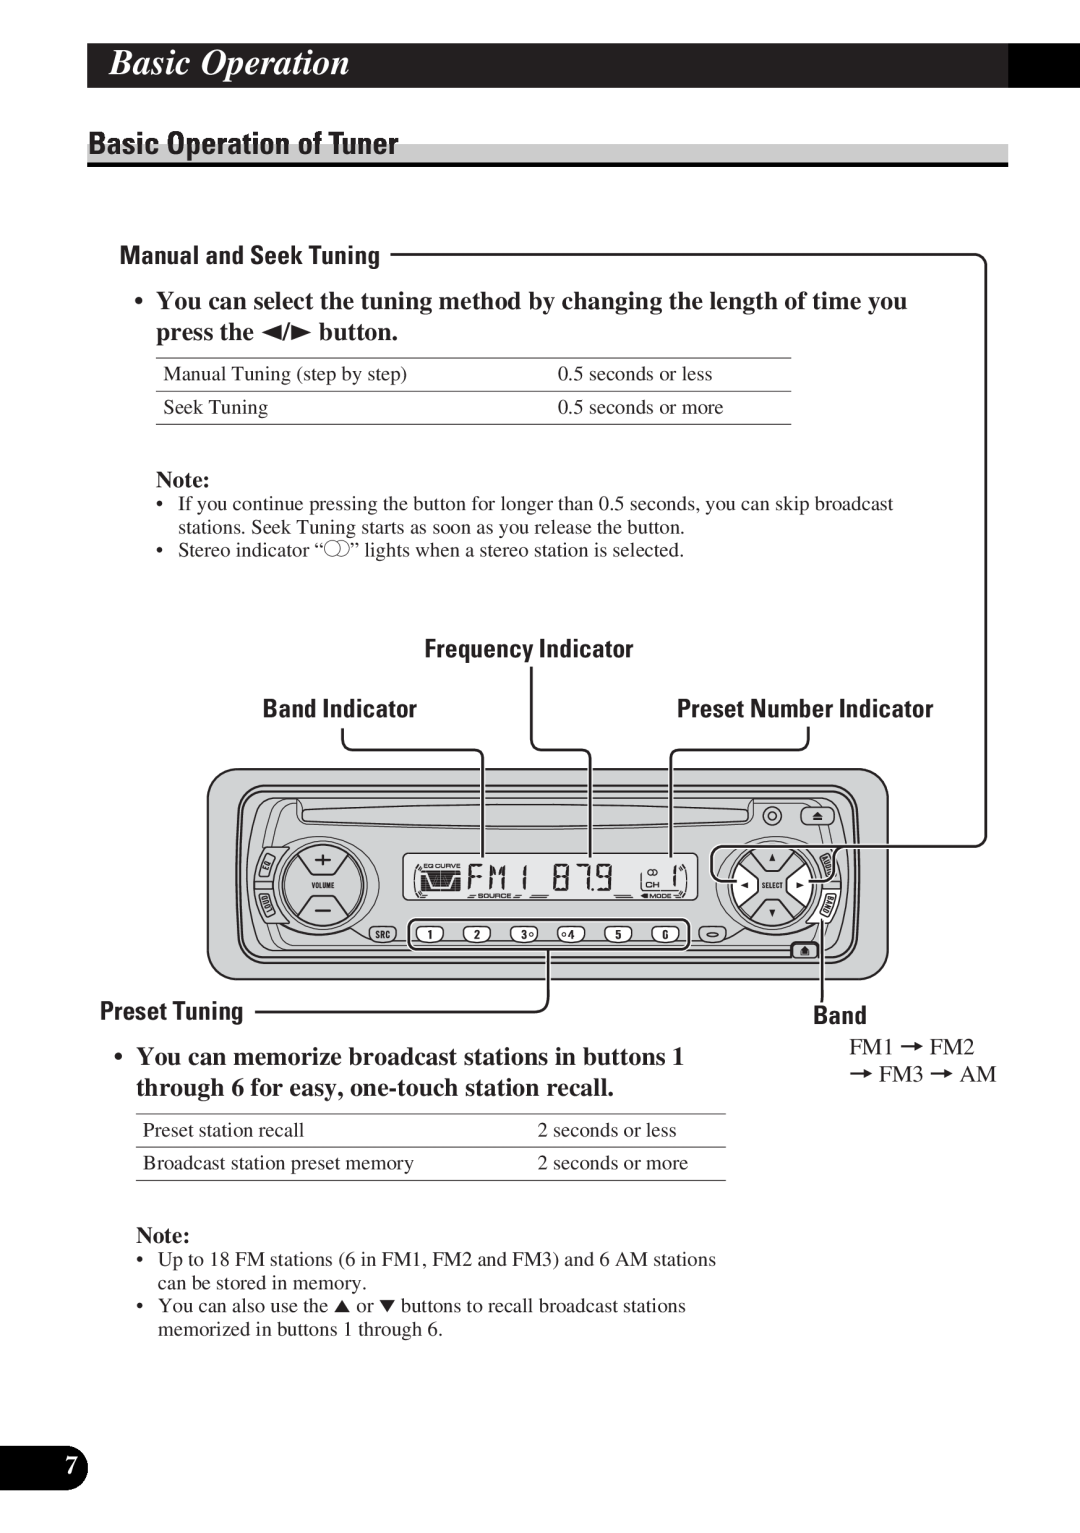 Pioneer DEH-12 Basic Operation of Tuner, Manual and Seek Tuning, Frequency Indicator, Preset Tuning, Band Indicator 